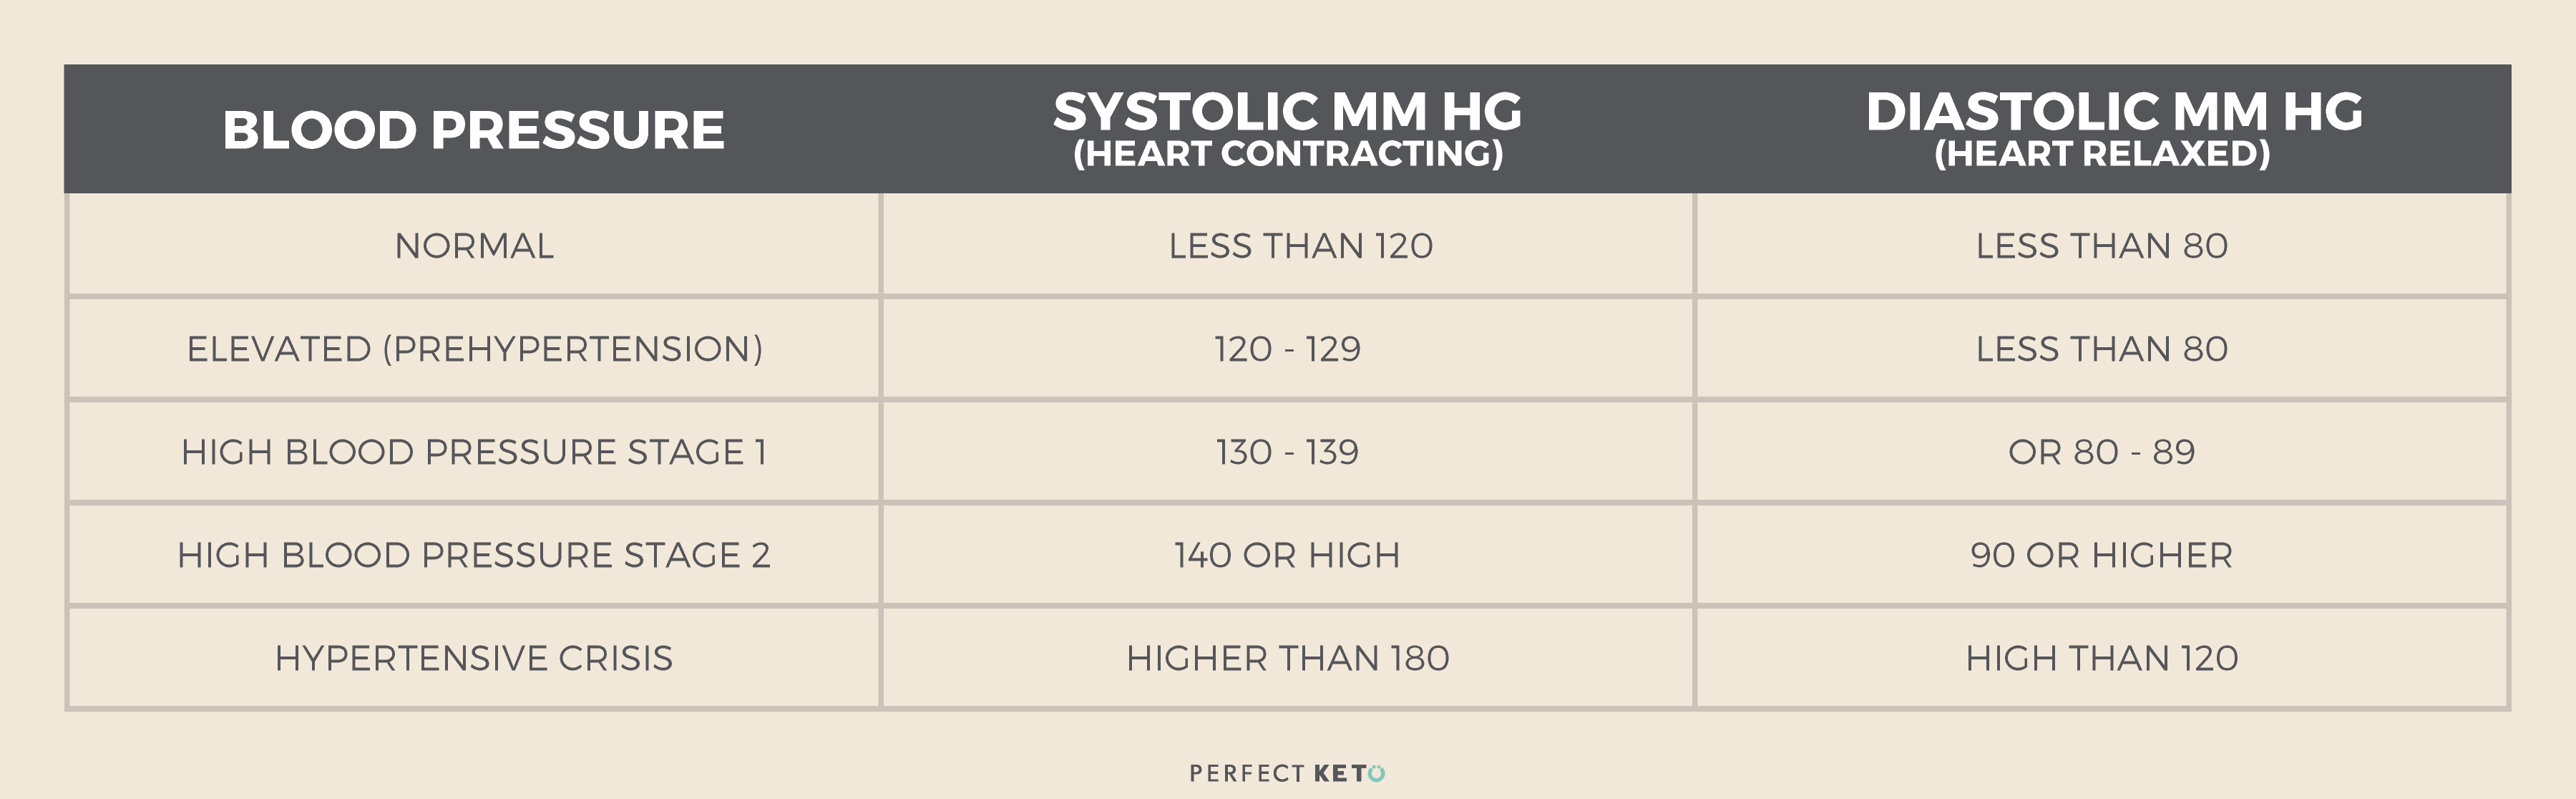 Blood PressureSystolic mm Hg (heart contracting)Diastolic mm Hg (heart relaxed)NormalLess than 120Less than 80Elevated (prehypertension)120-129Less than 80High Blood Pressure Stage 1130-1390r 80-89High Blood Pressure Stage 2140 or high90 or higherHypertensive CrisisHigher than 180High than 120